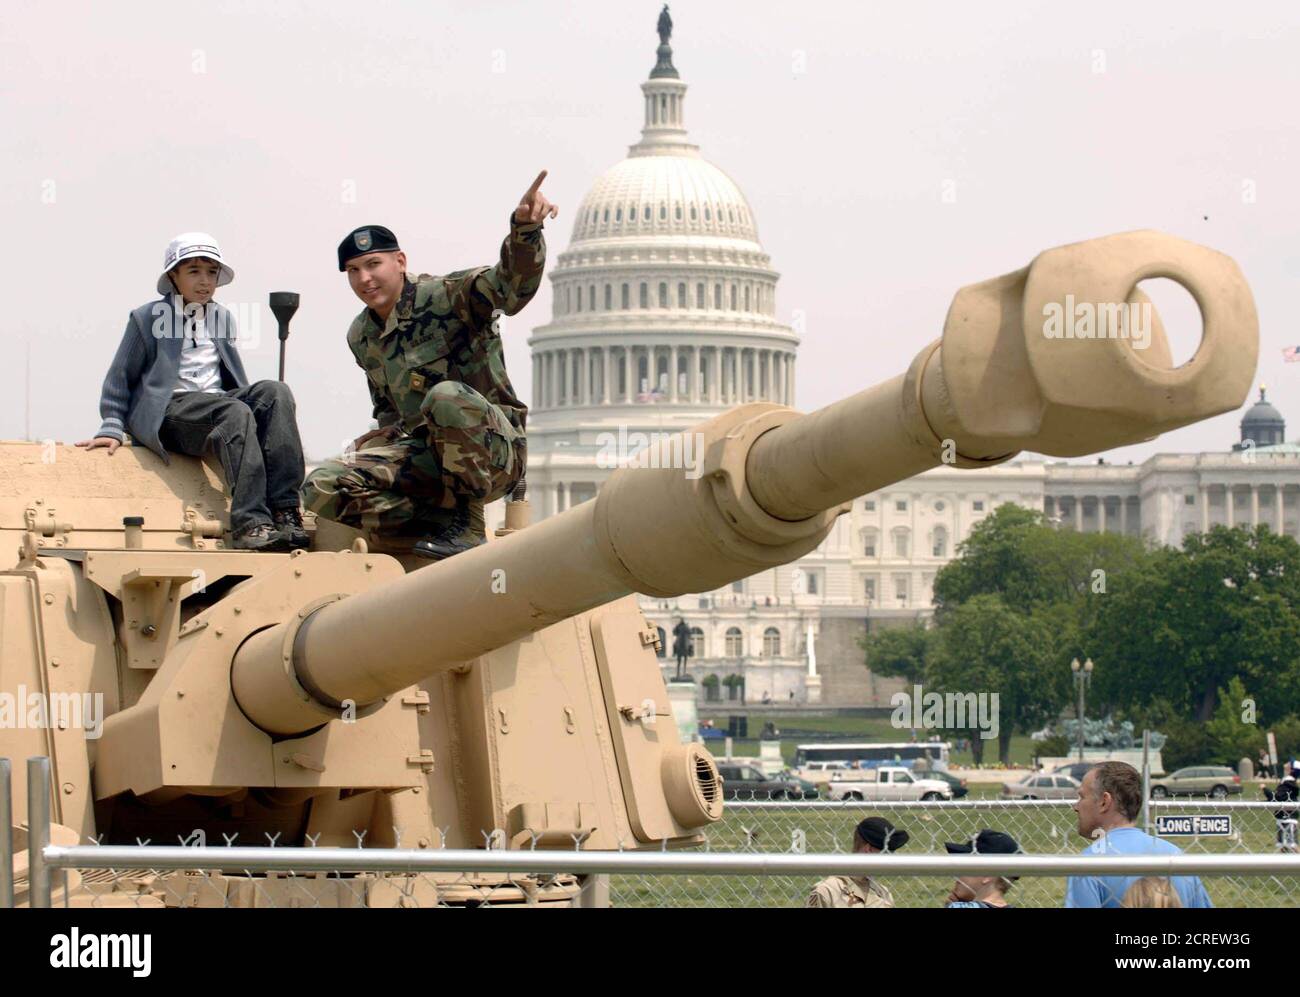 U.S. Army Sgt. Shaun Saki points out the barrel of his tank to nine-year-old Mark Bernshtam (L) on the Mall near the U.S. Capitol in Washington, May 5, 2005. The Army is hosting Public Service Recognition Week, with displays of military hardware from all the branches of the U.S. military. Saki is the tank gunner from A 2/5 Field Artillery, 221th Bde, Fort Sill, Oklahoma. REUTERS/Mannie Garcia  mg Stock Photo